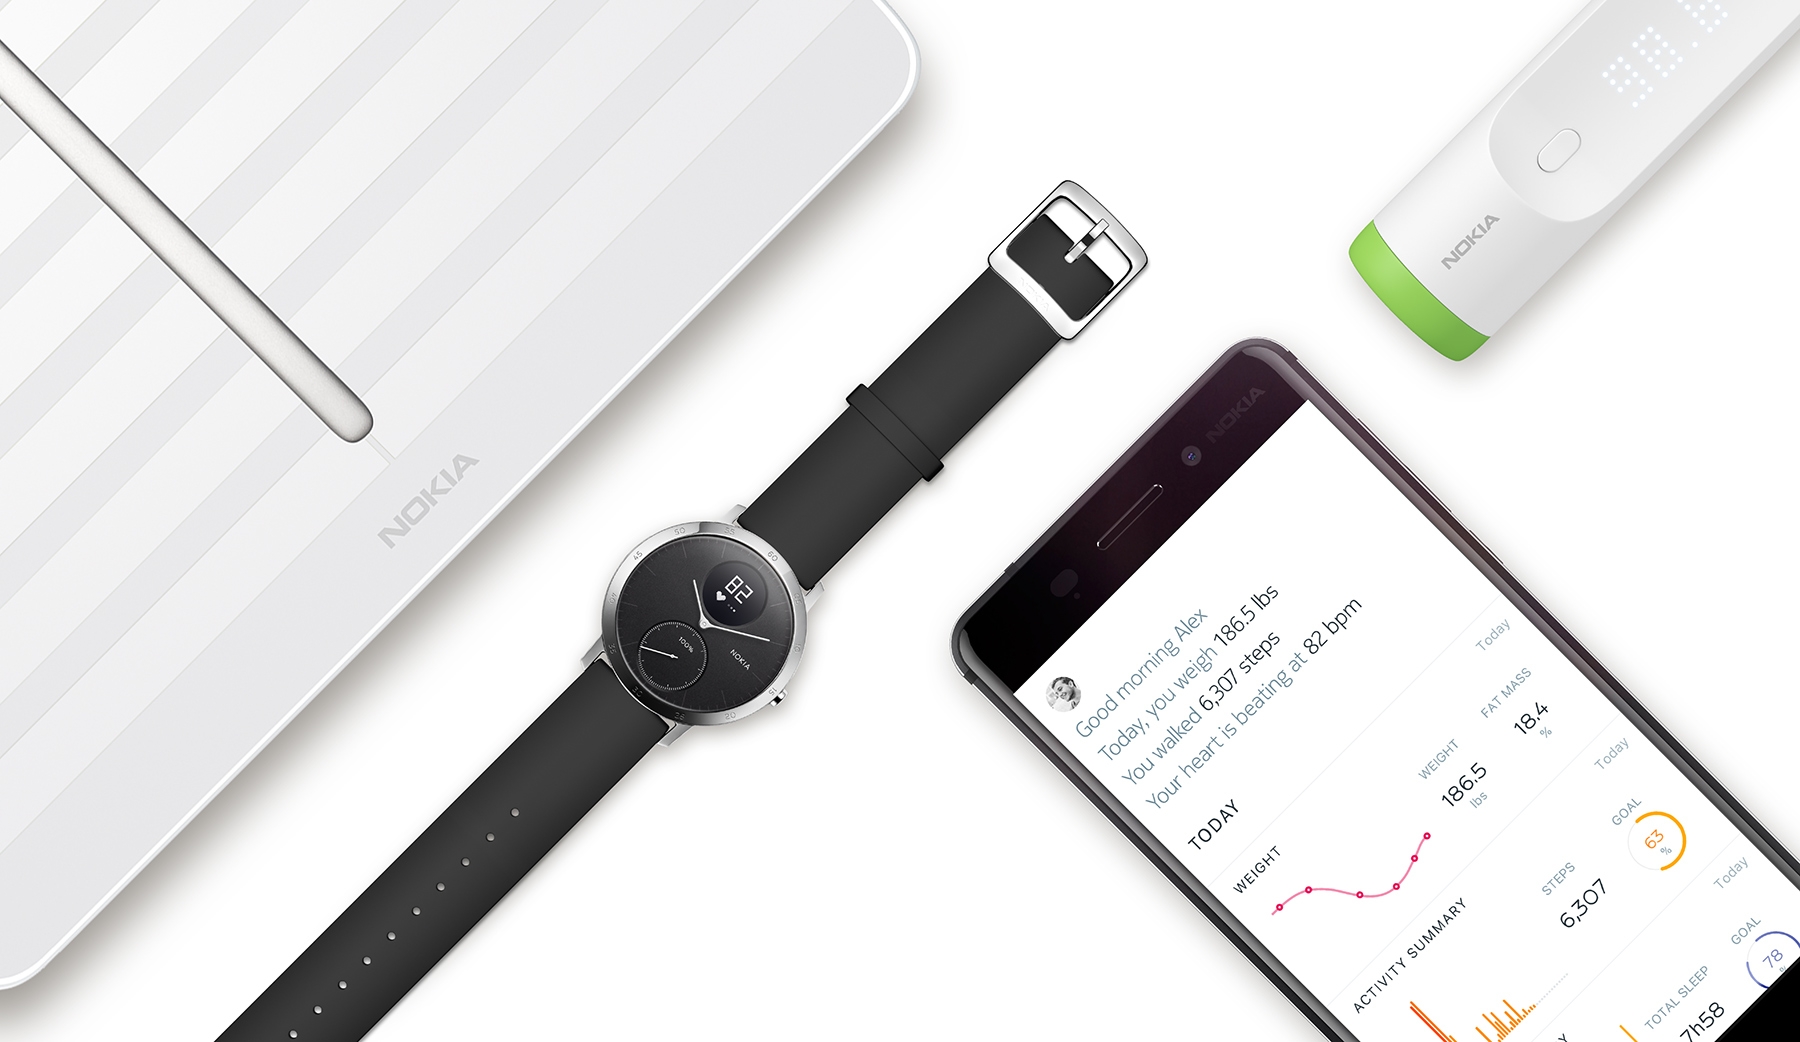 Withings returns at a dark time for wearables | DeviceDaily.com